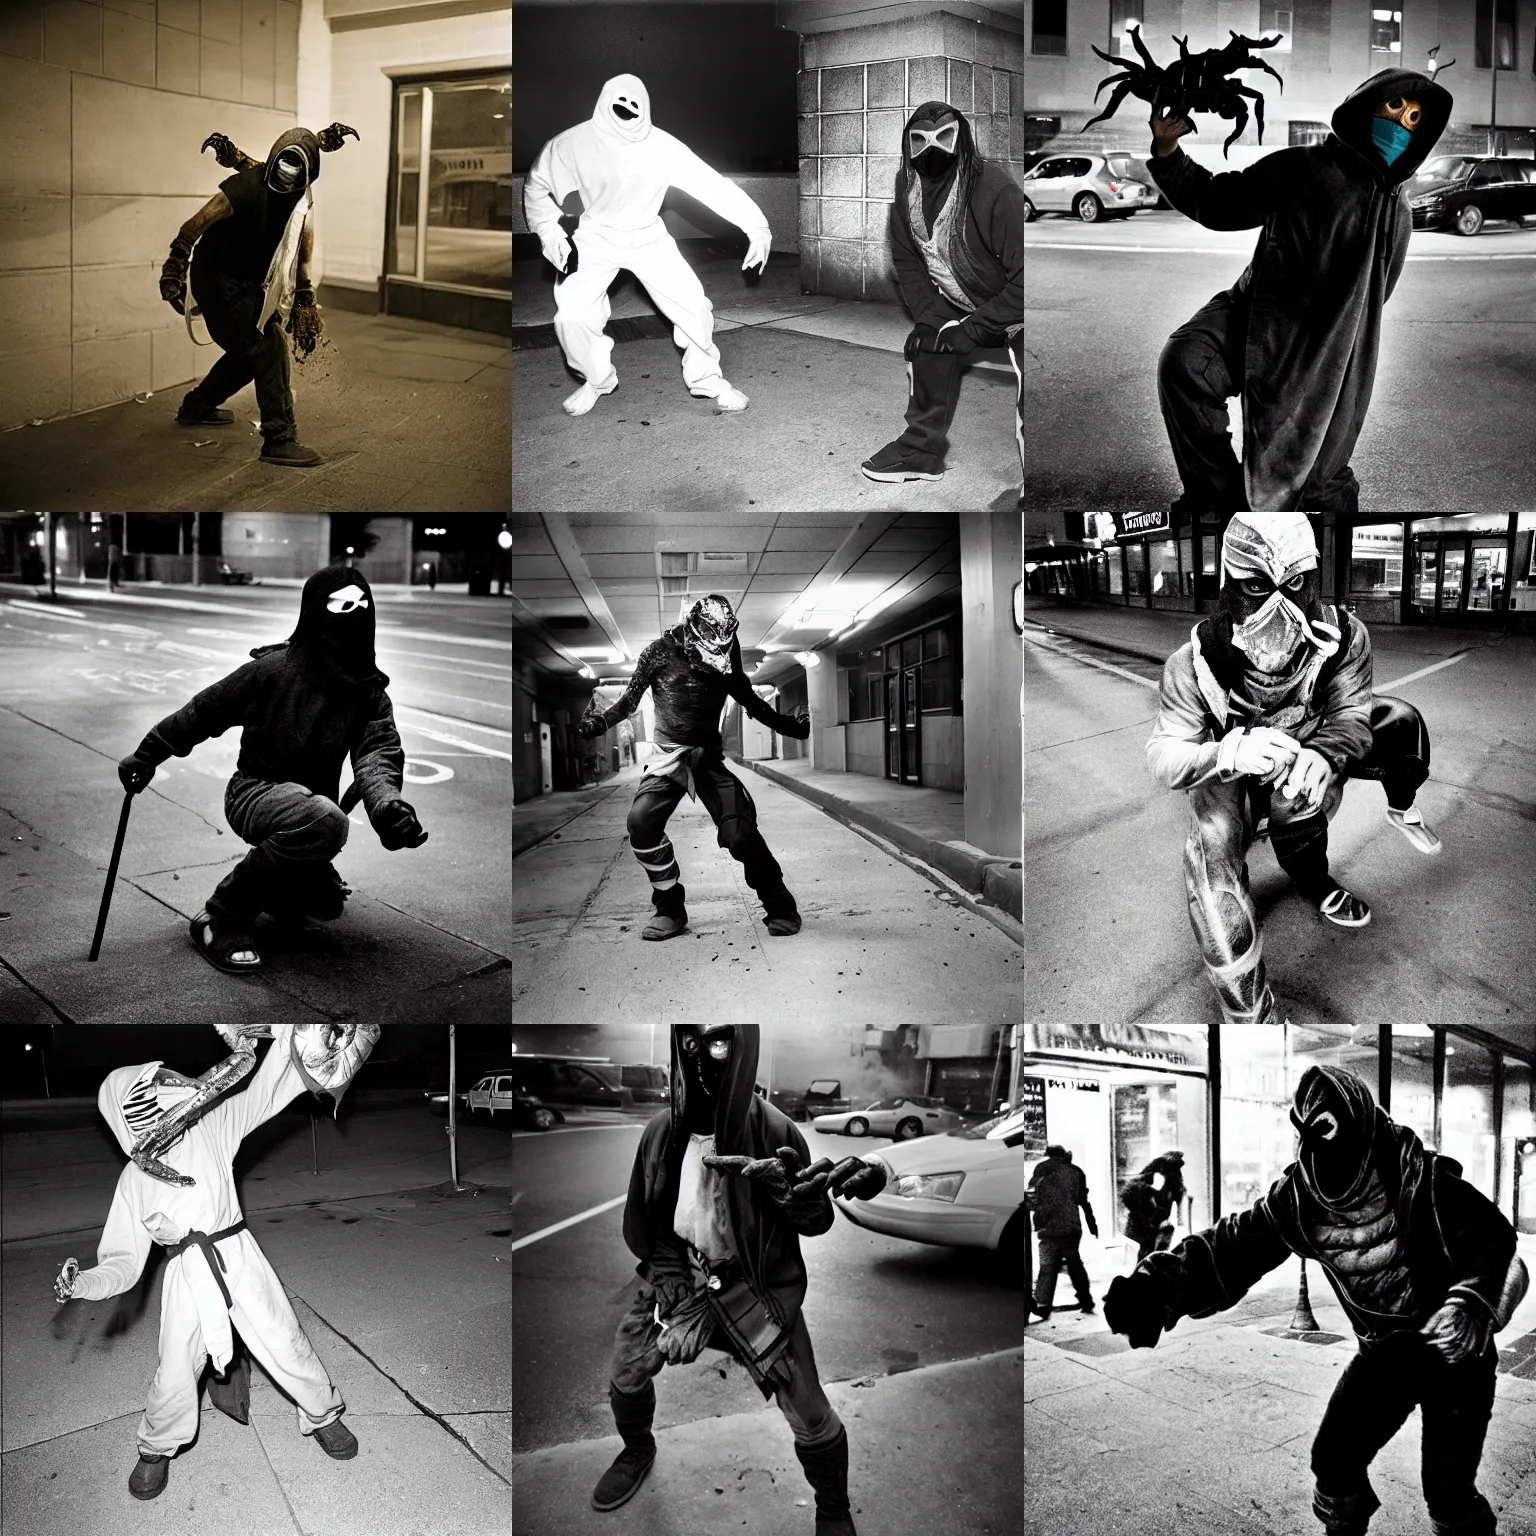 Prompt: homeless sub zero from mortal kombat in a mask fighting homeless scorpion, by bruce gilden, on a parking lot, overexposed, harsh flash, grainy, dim color, magnum photos